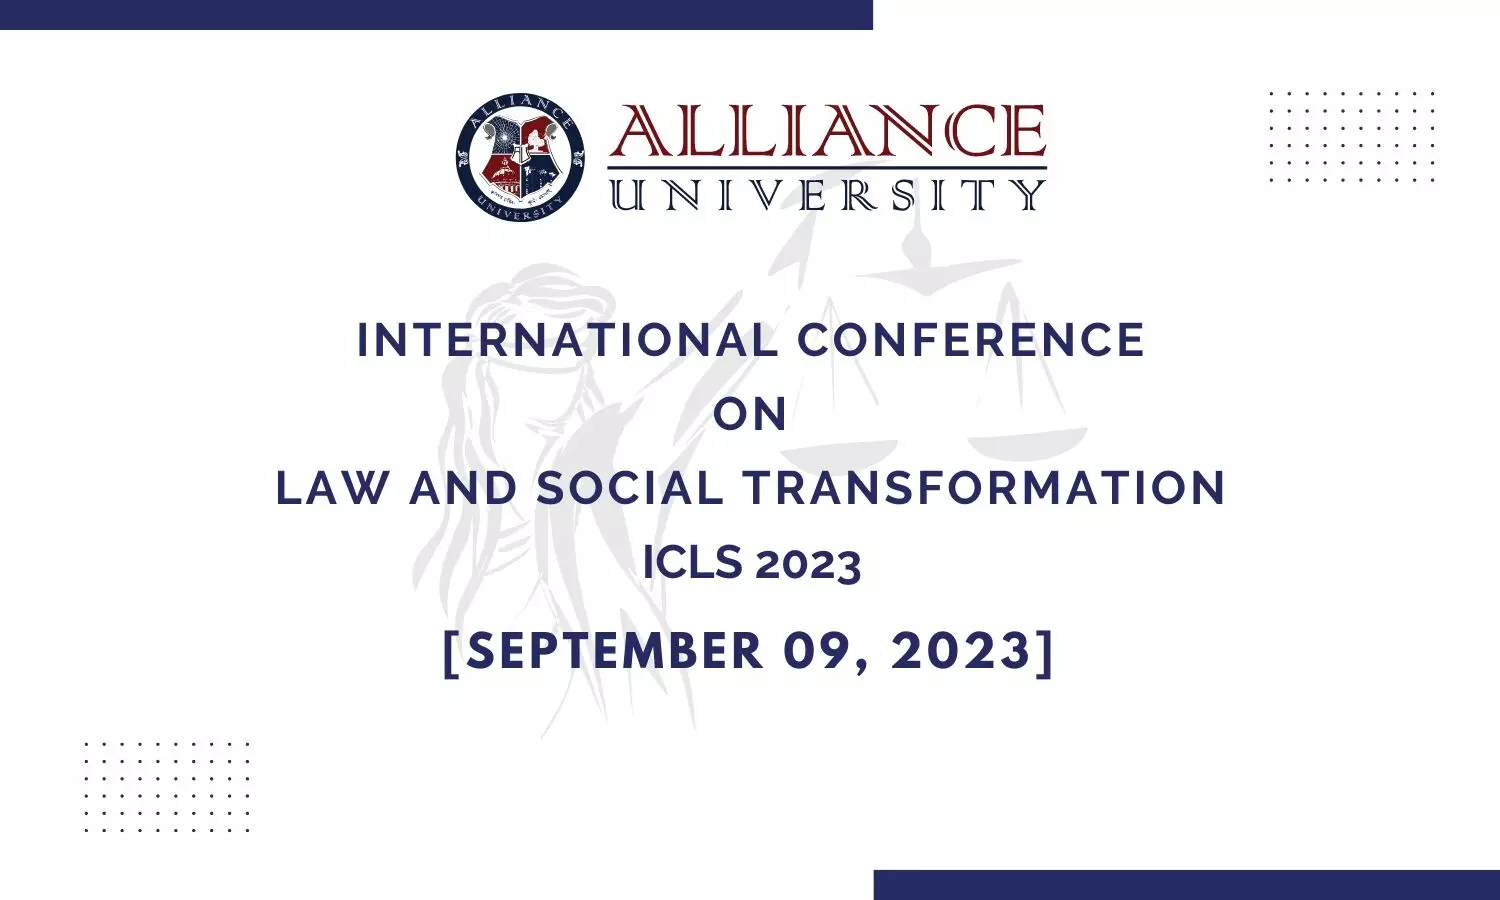 International Conference on Law and Social Transformation ICLS 2023 | Alliance University